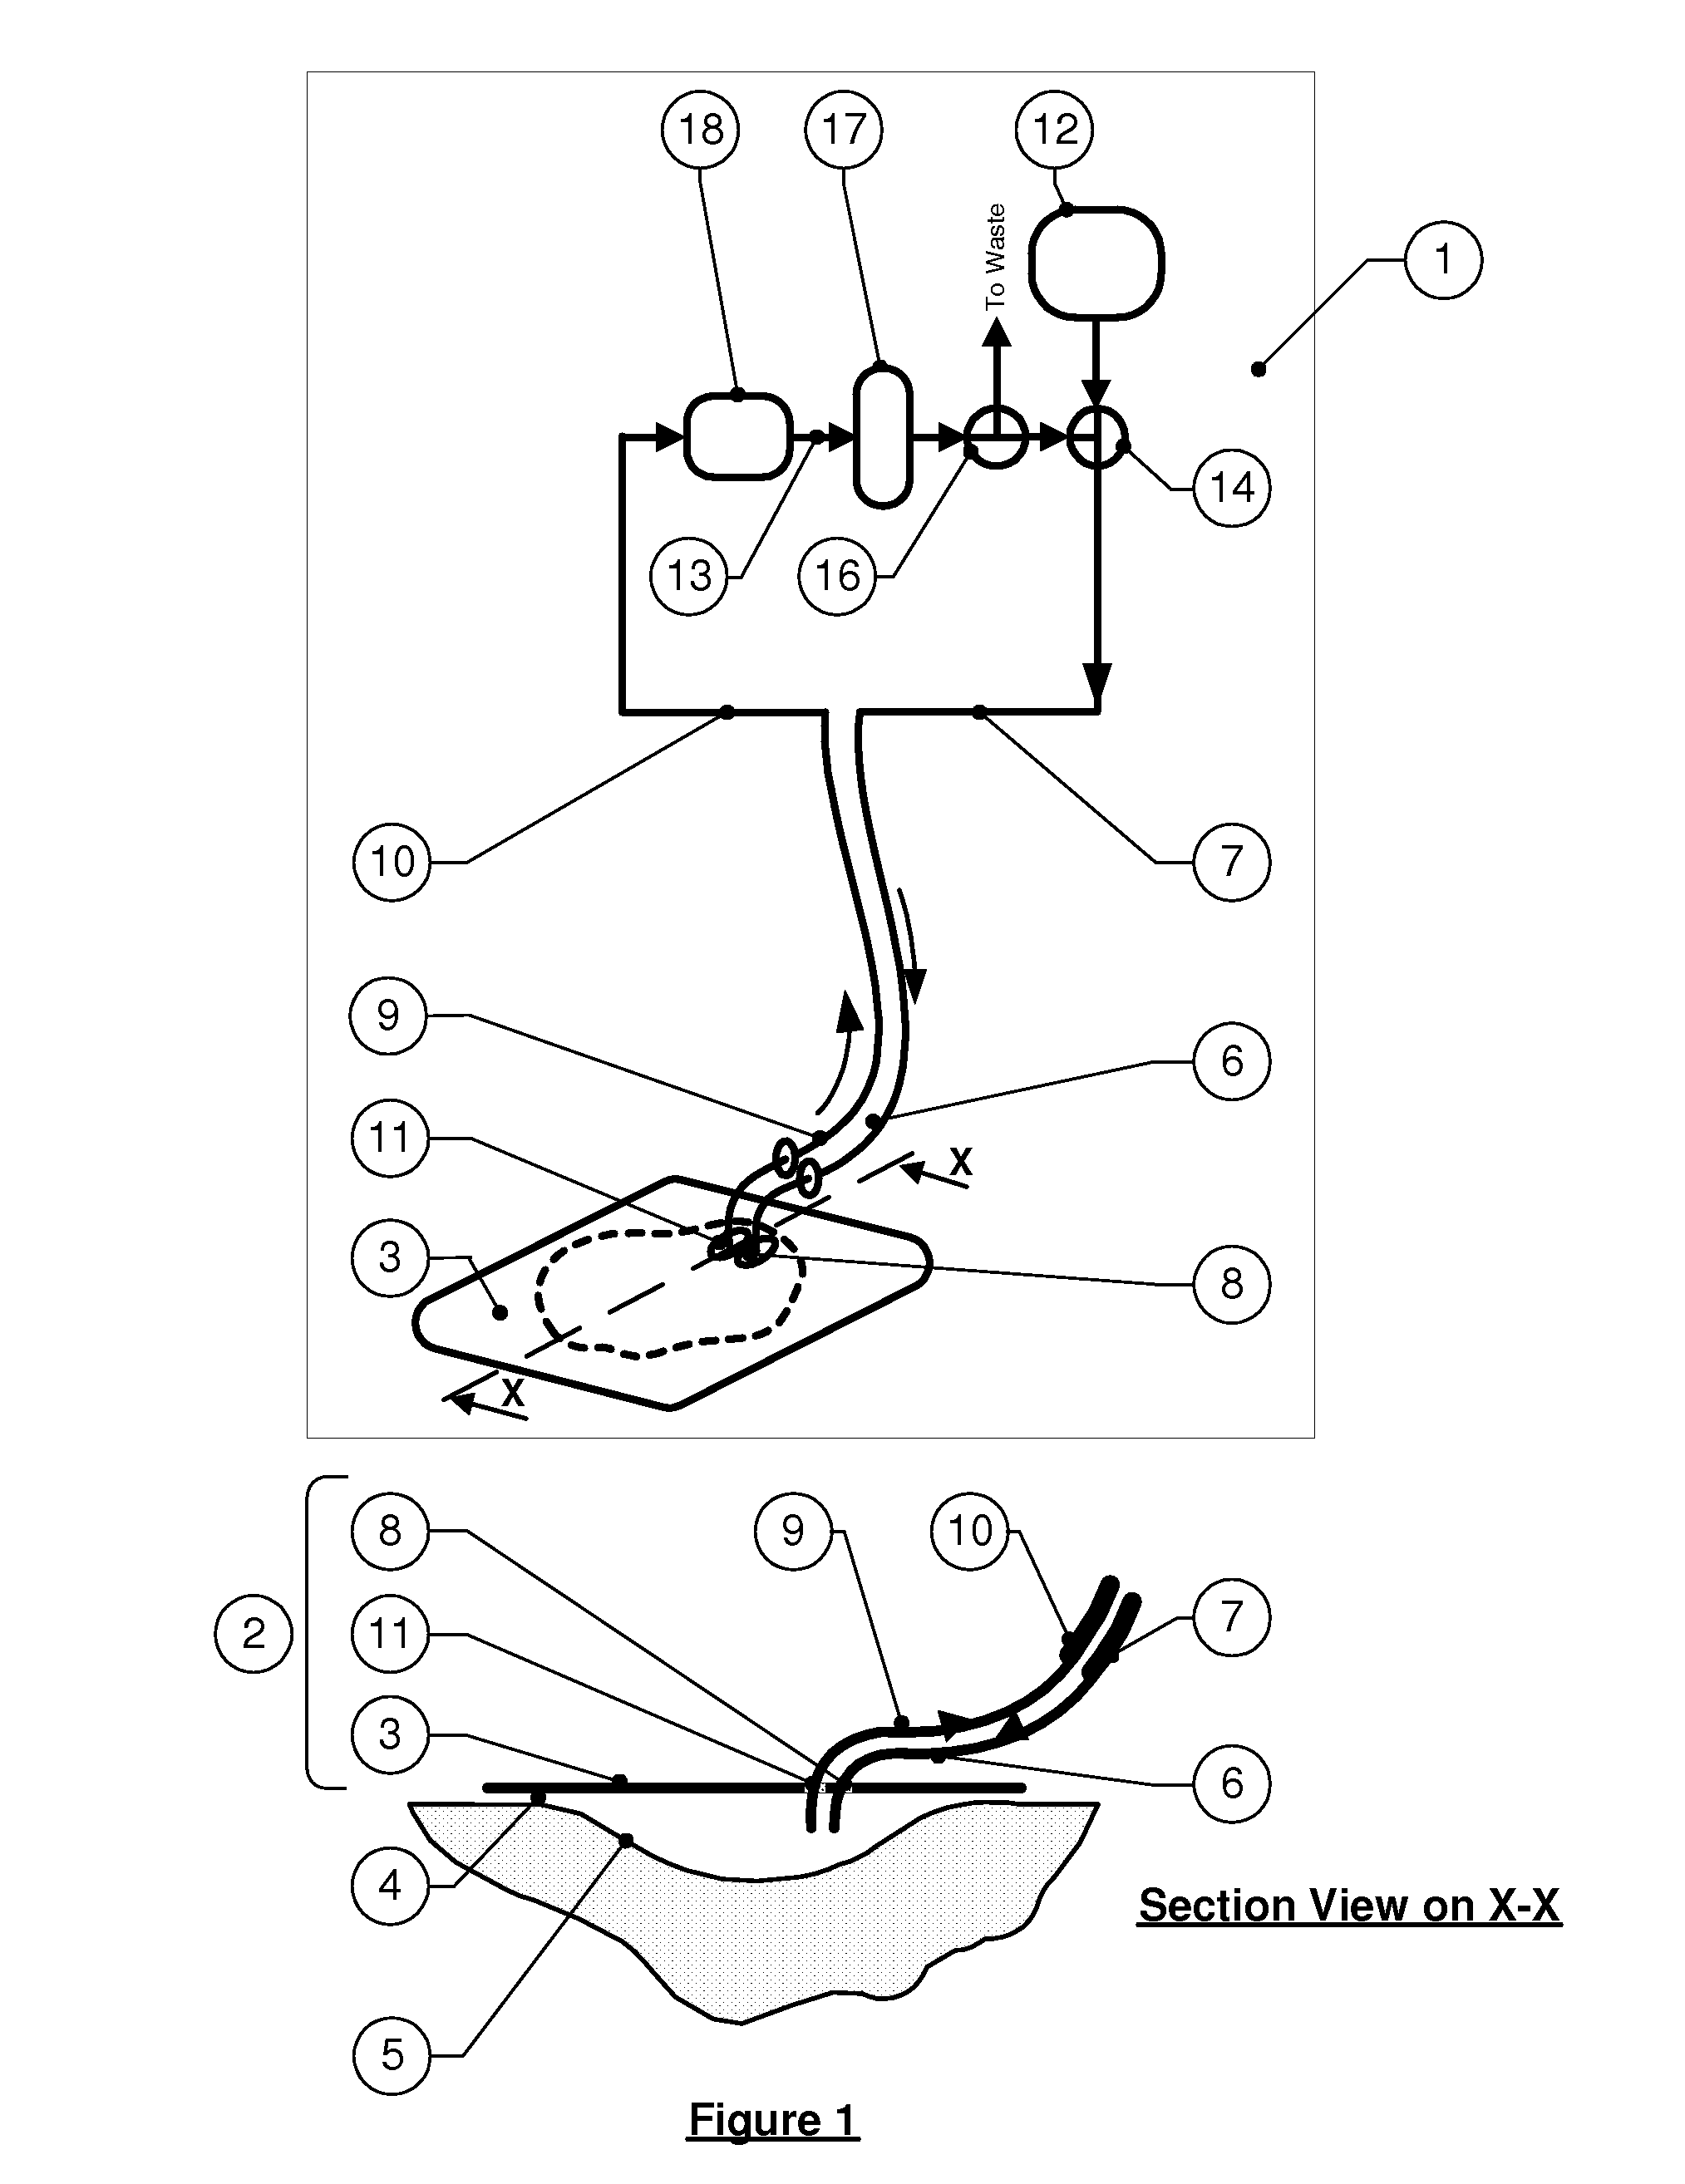 Apparatus for cleansing wounds with means for supply of thermal energy to the therapy fluid